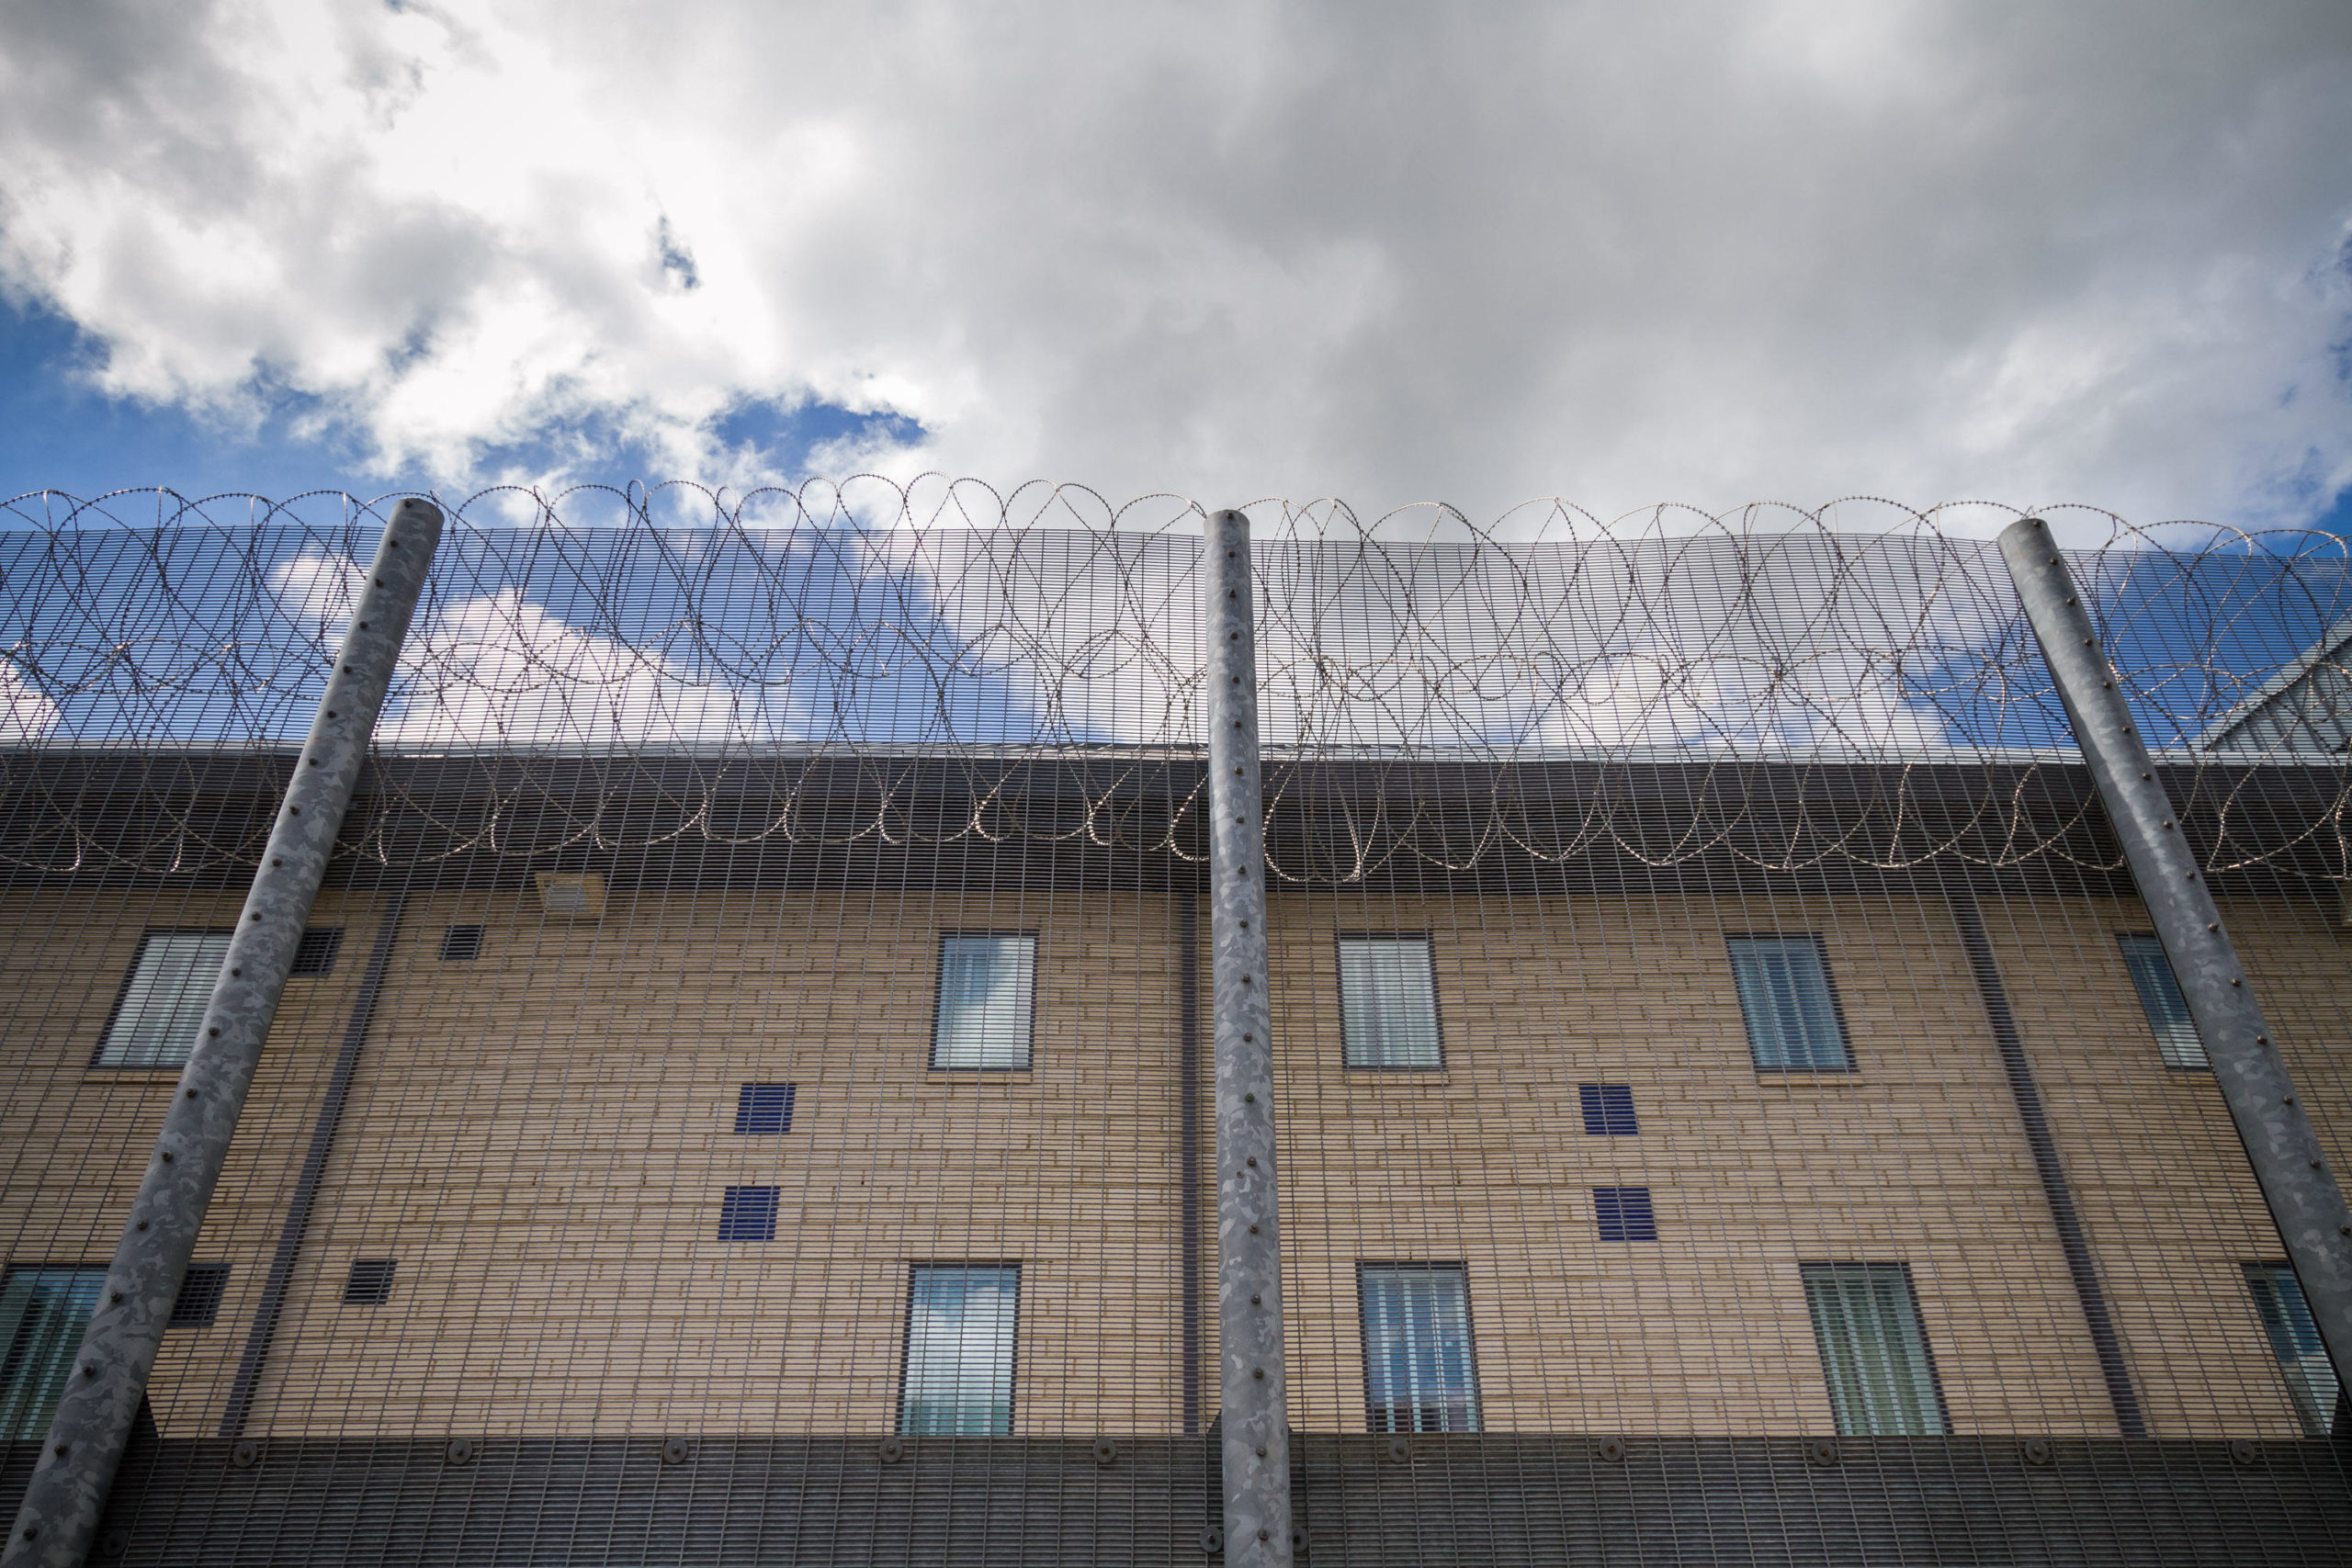 “I can’t sleep”: COVID-19 fears inside immigration detention centres